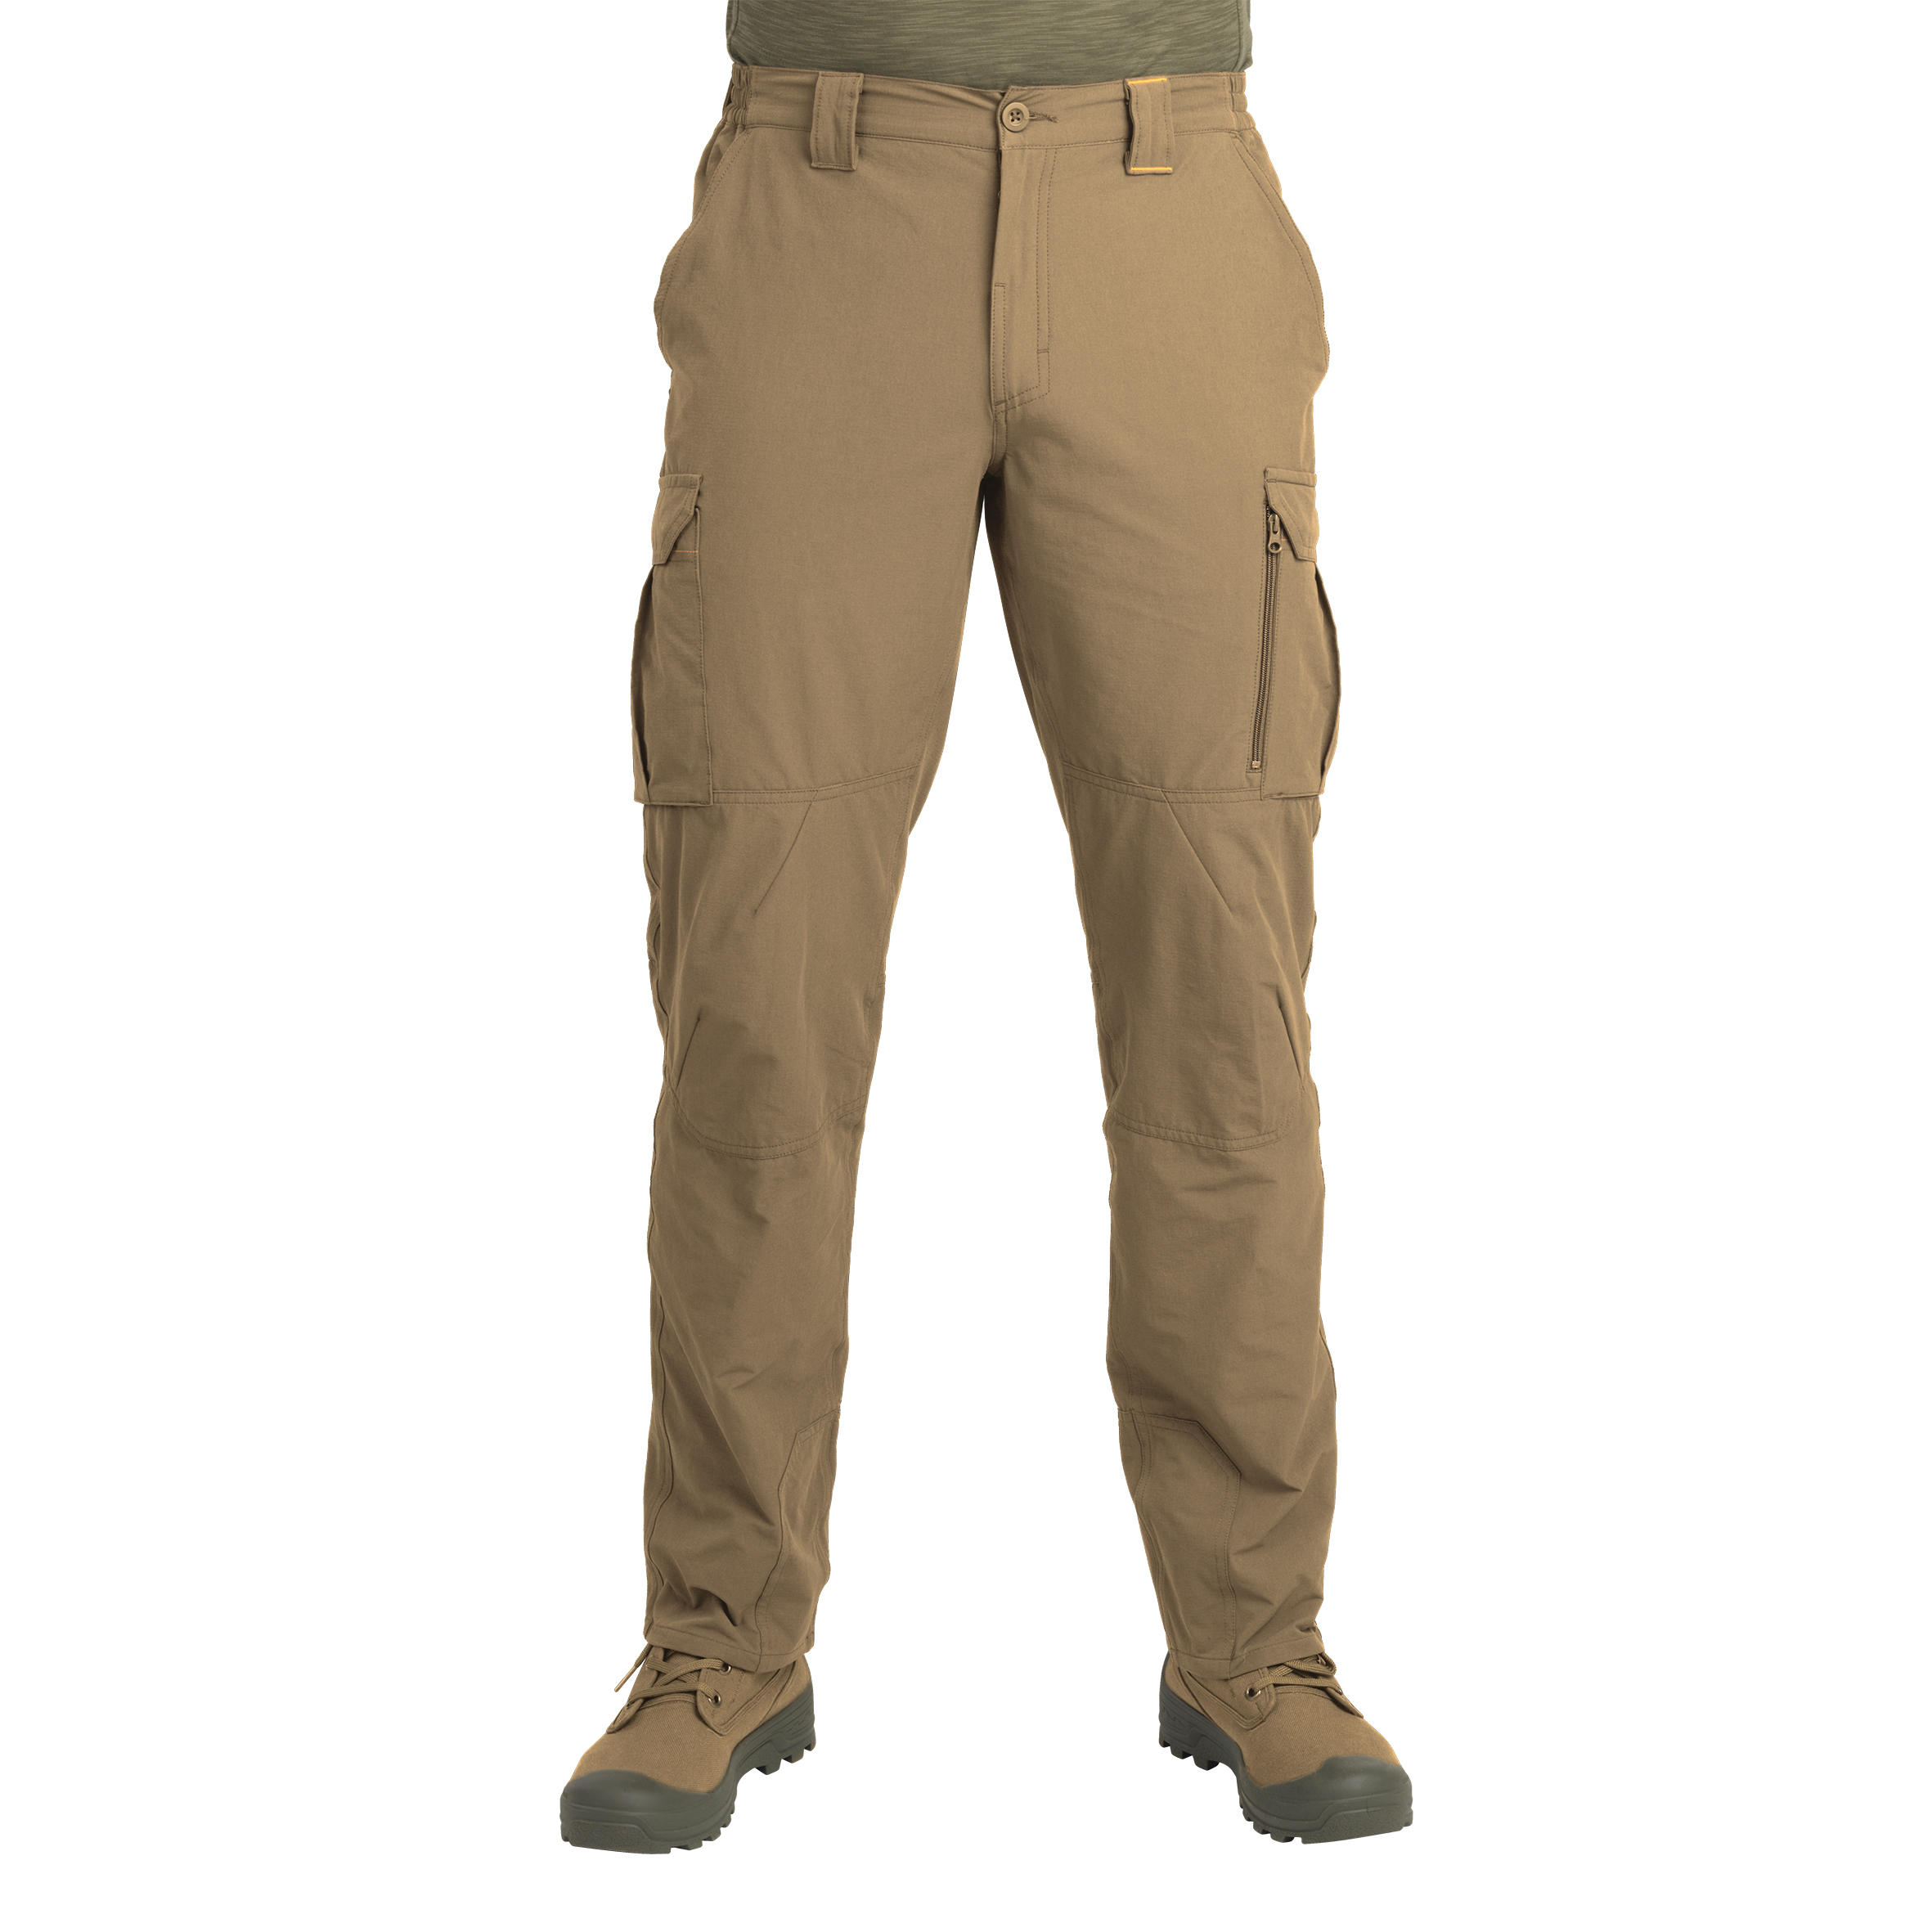 Image of 500 Hunting Lightweight Breathable Pants - Men